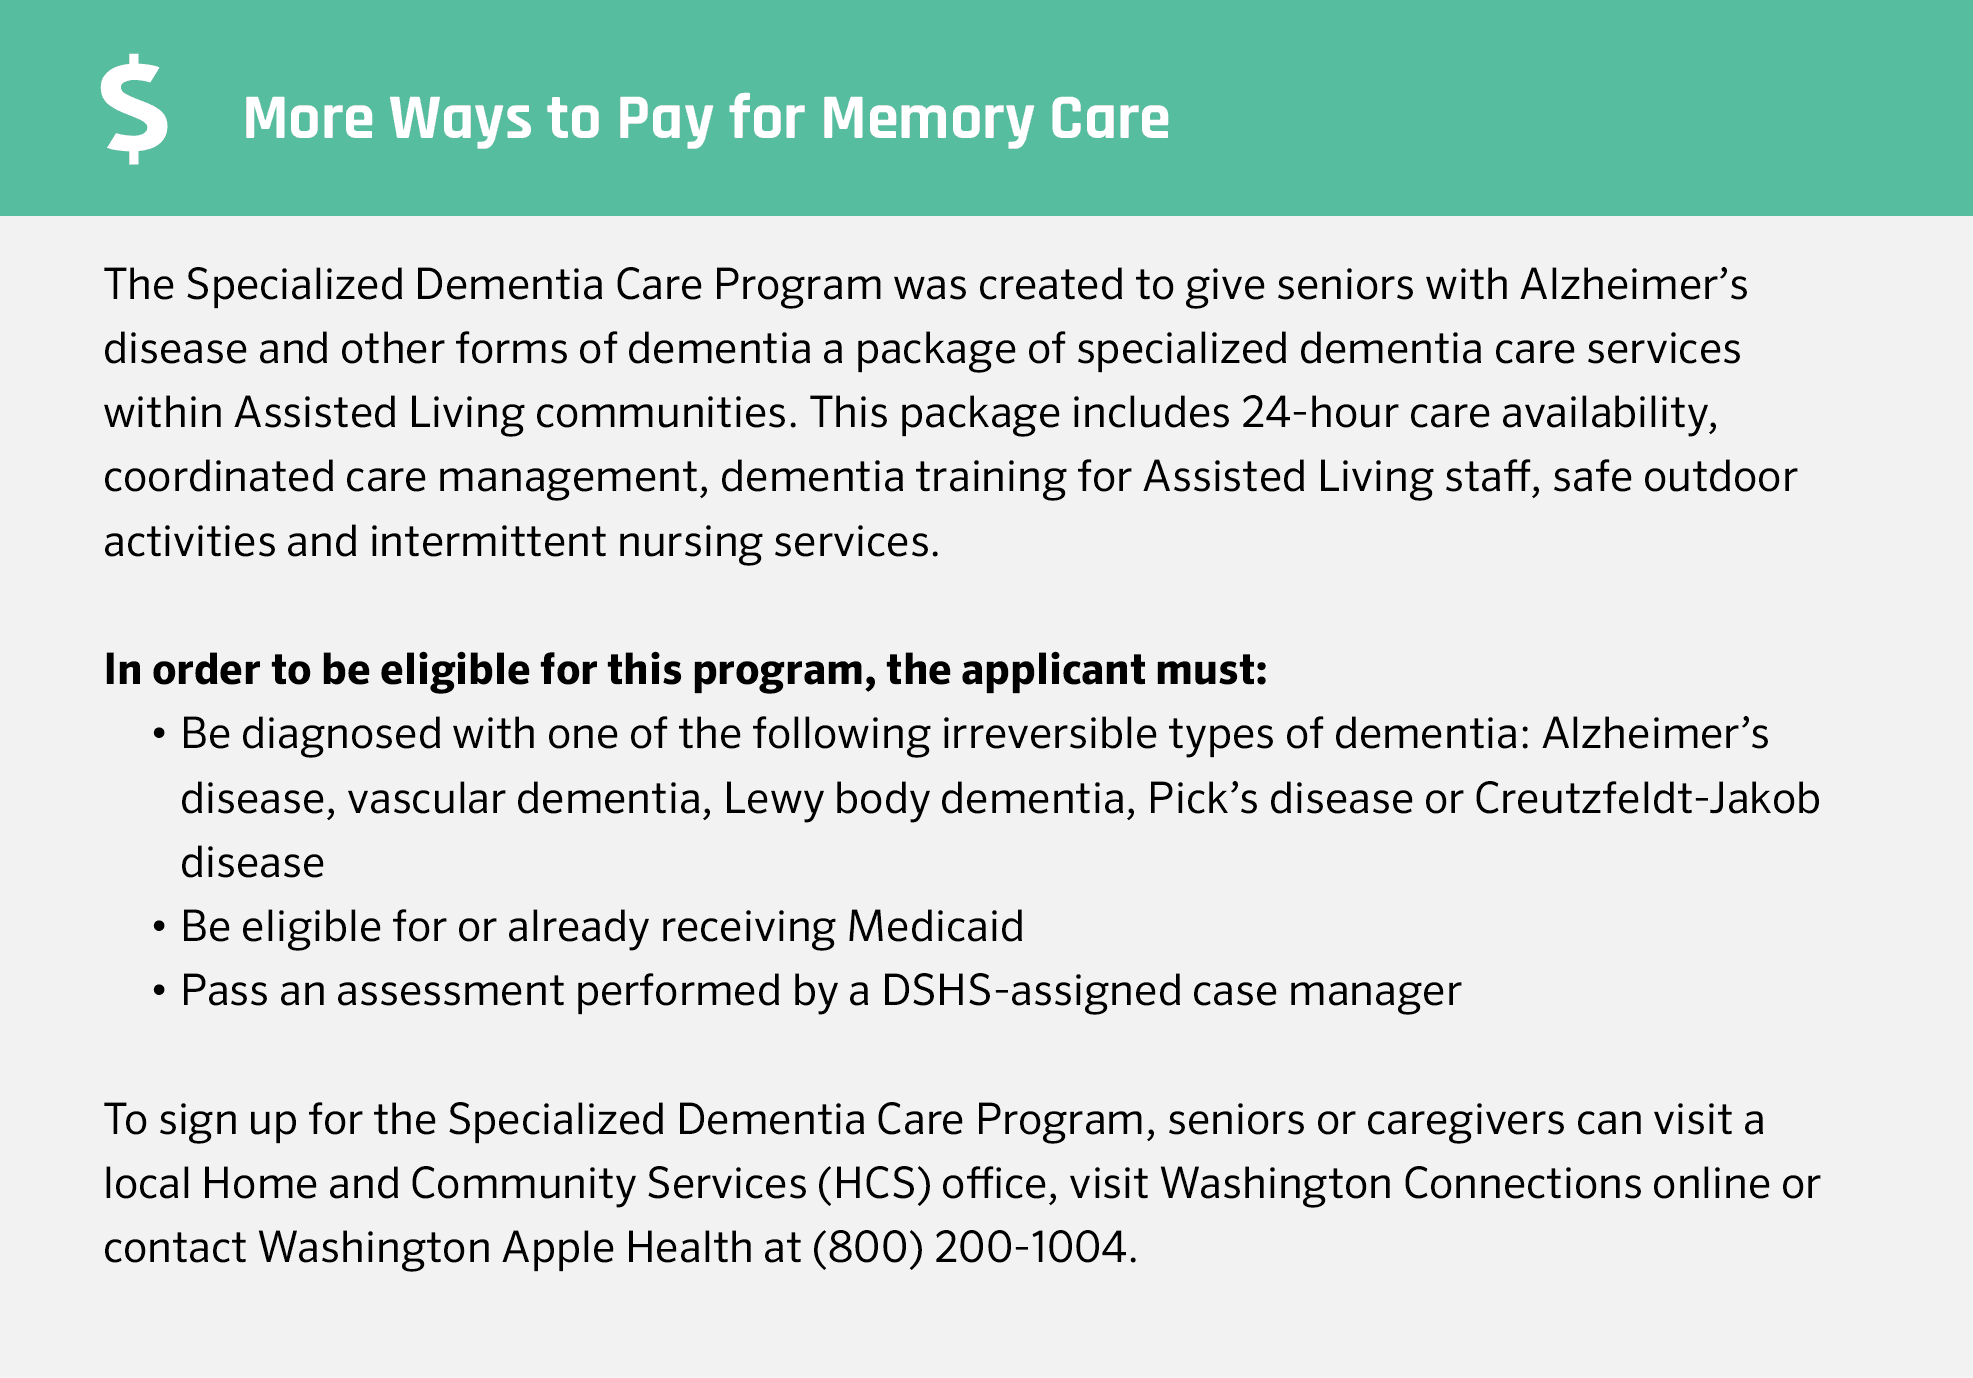 More ways to pay for memory care in Washington